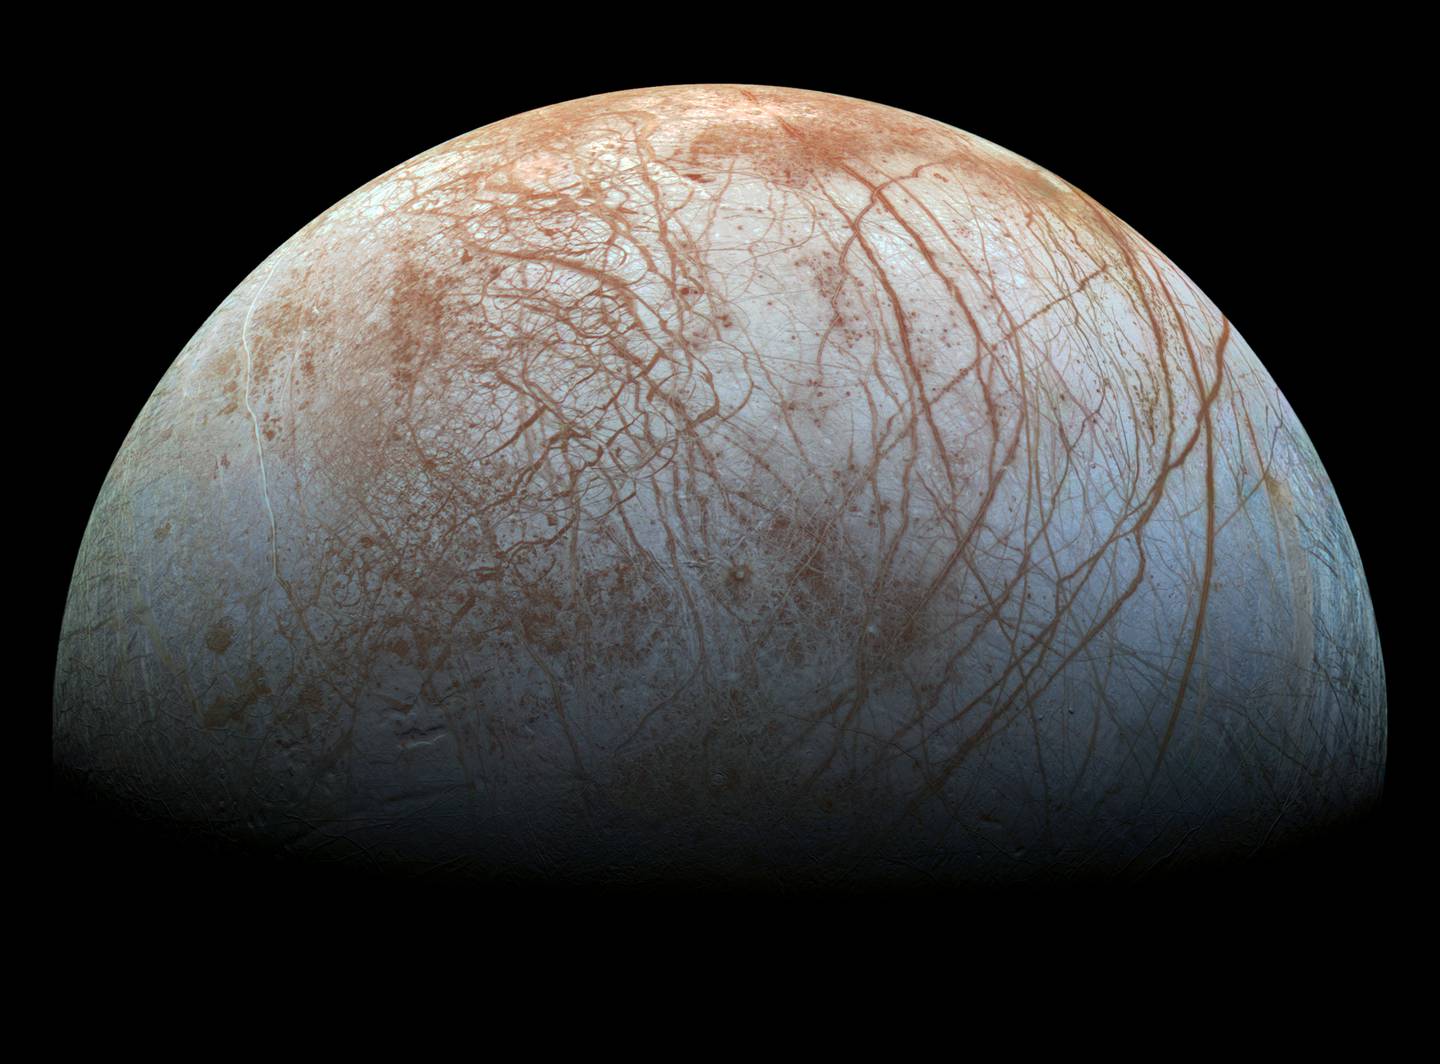 A composite image of Europa, one of Jupiter's icy moons, released by NASA in 2014.